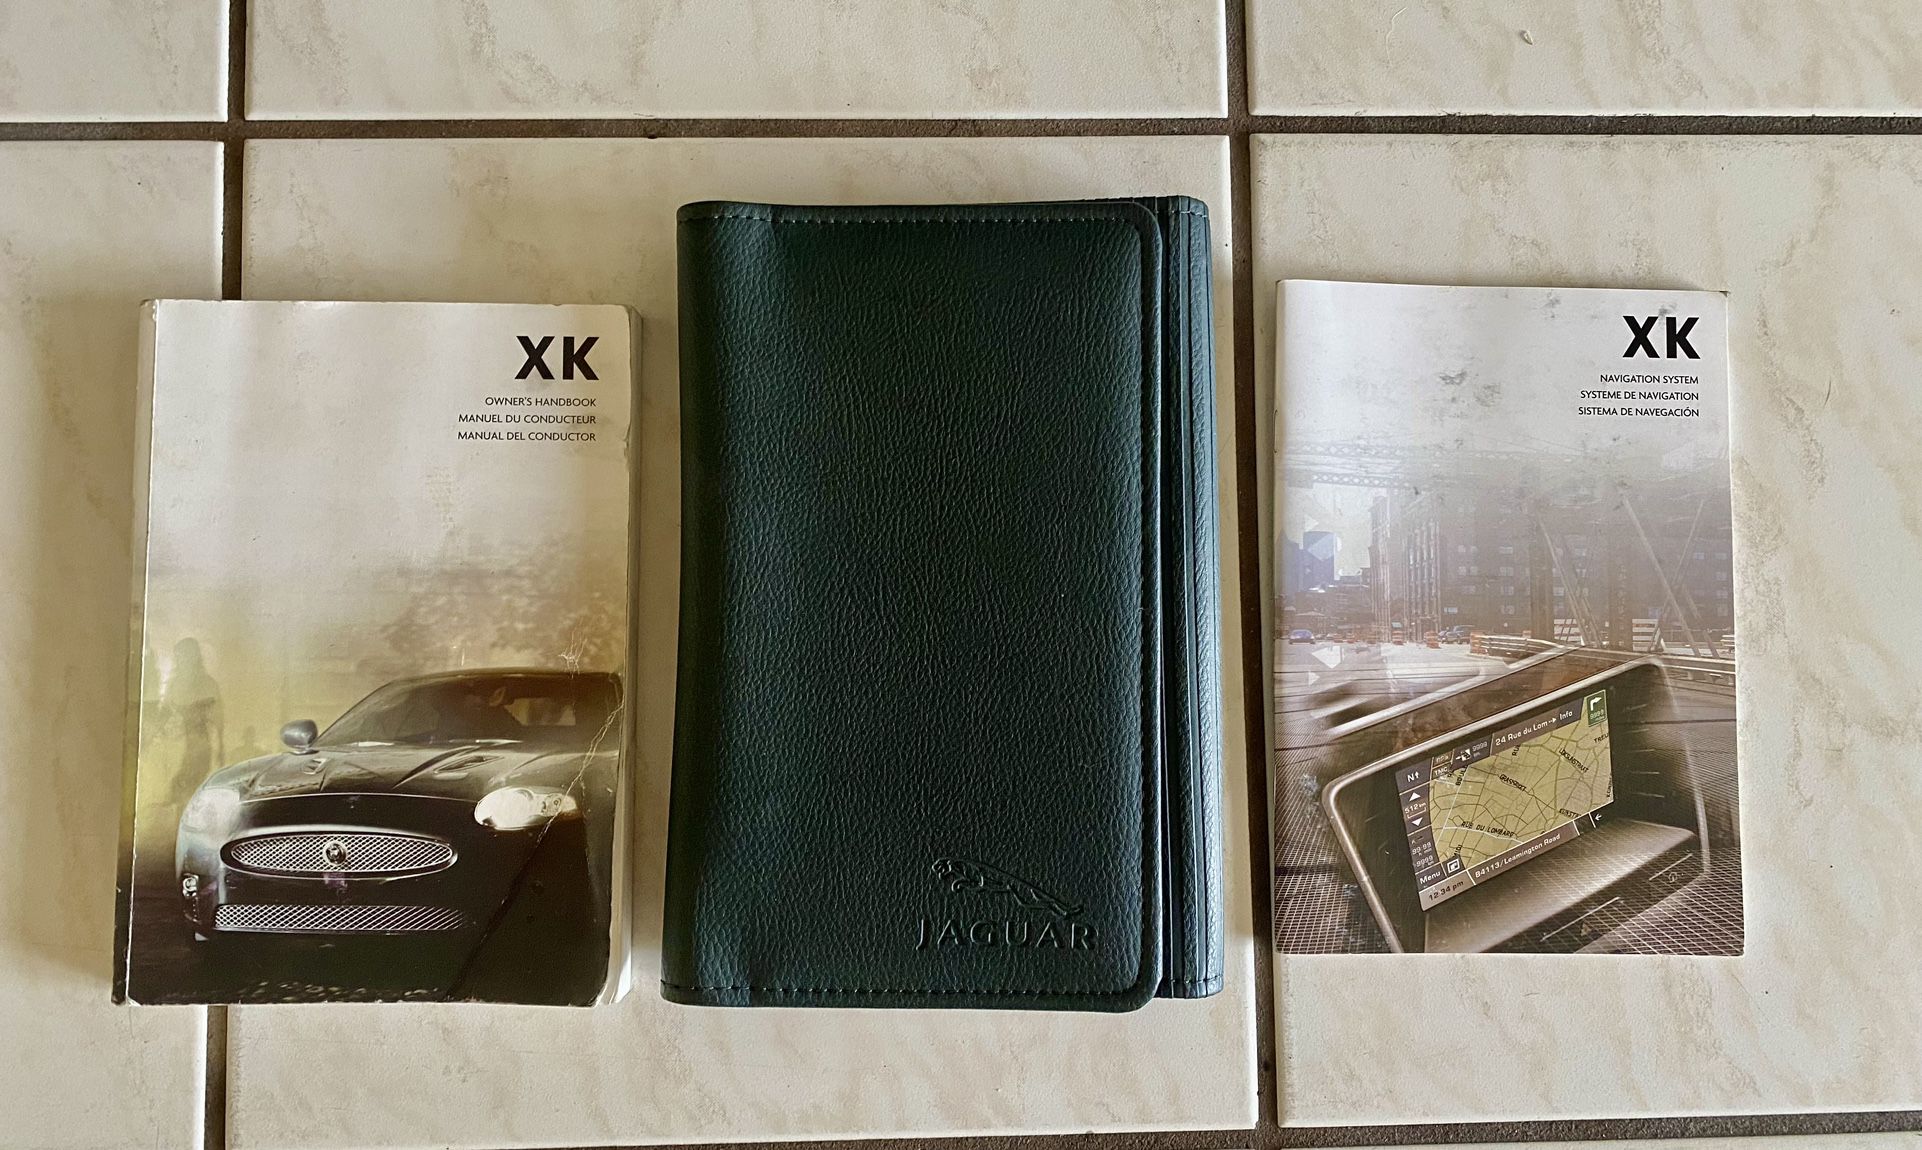 Jaguar XK owners manuals With Leather Case